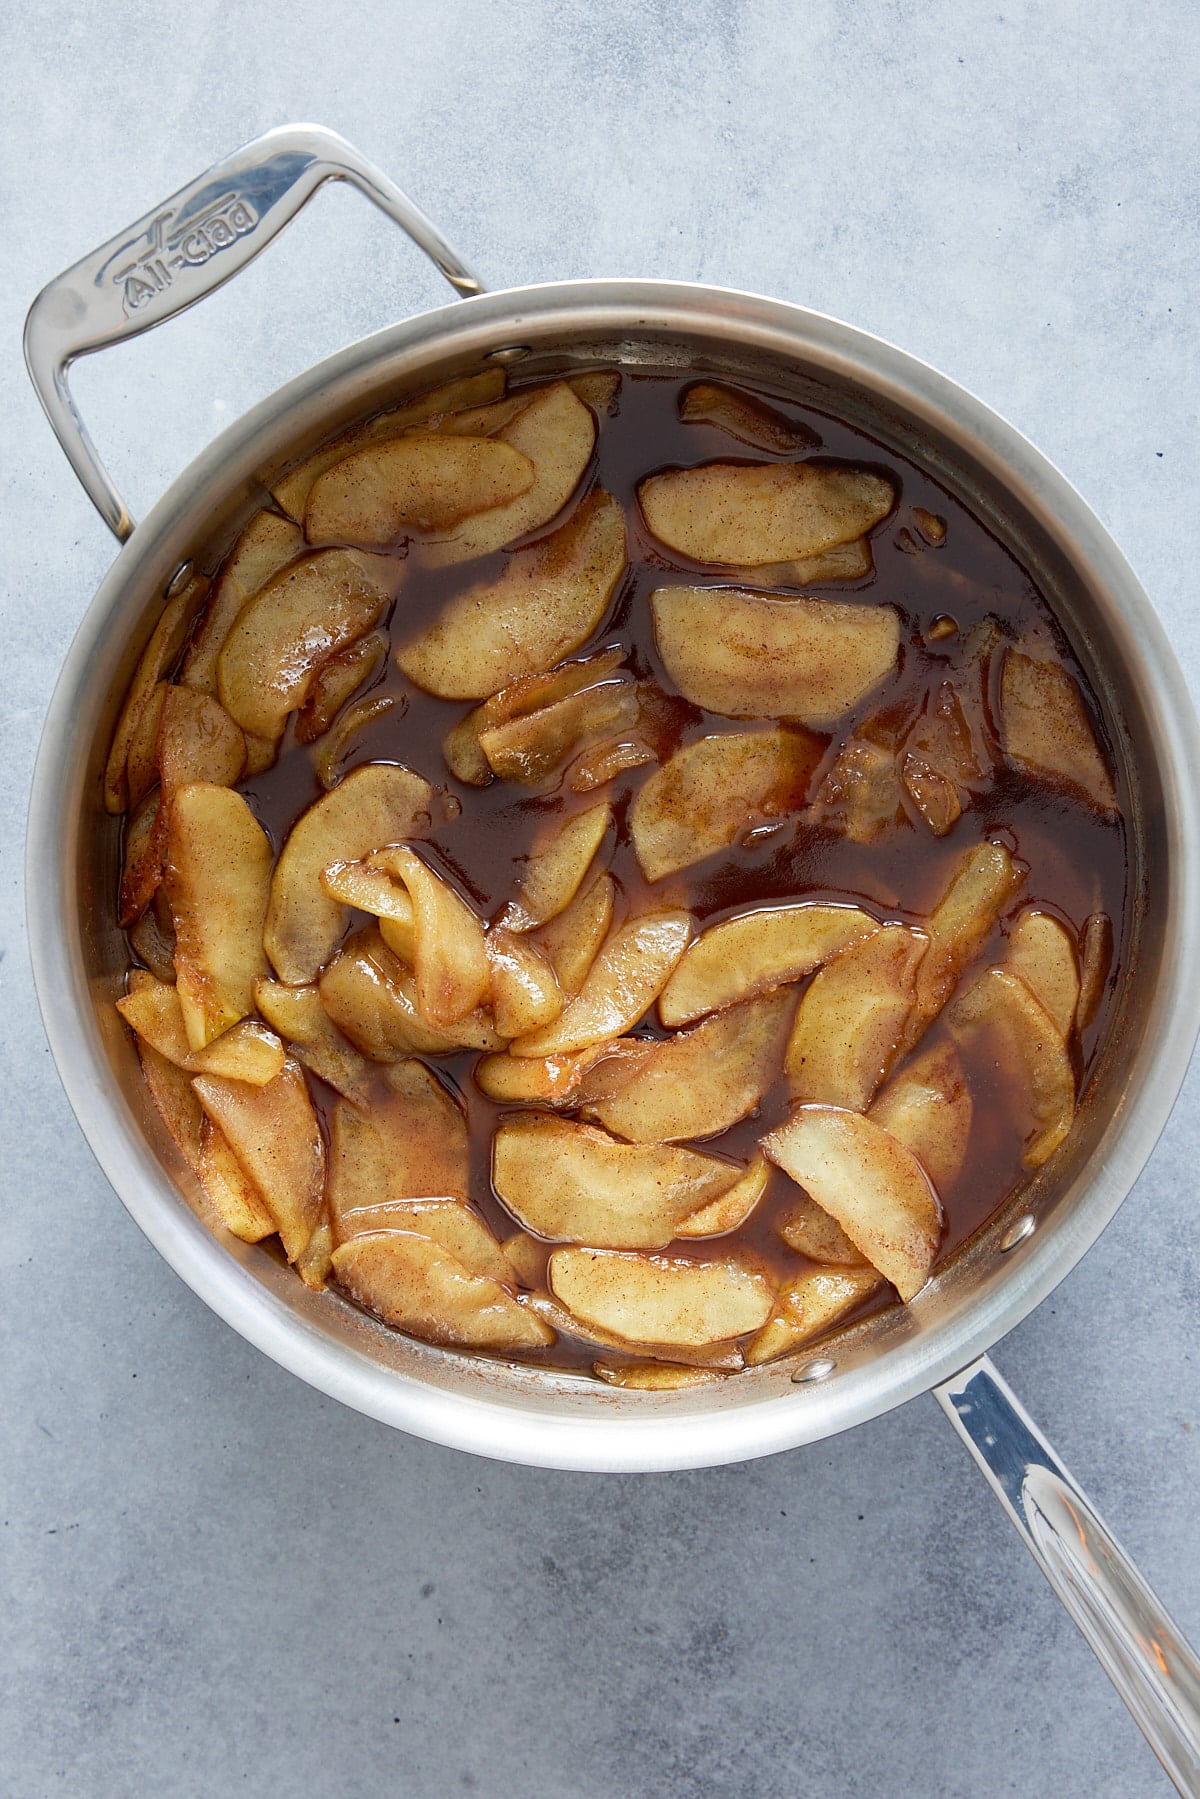 Top down image of a pan with cooked Southern fried apples